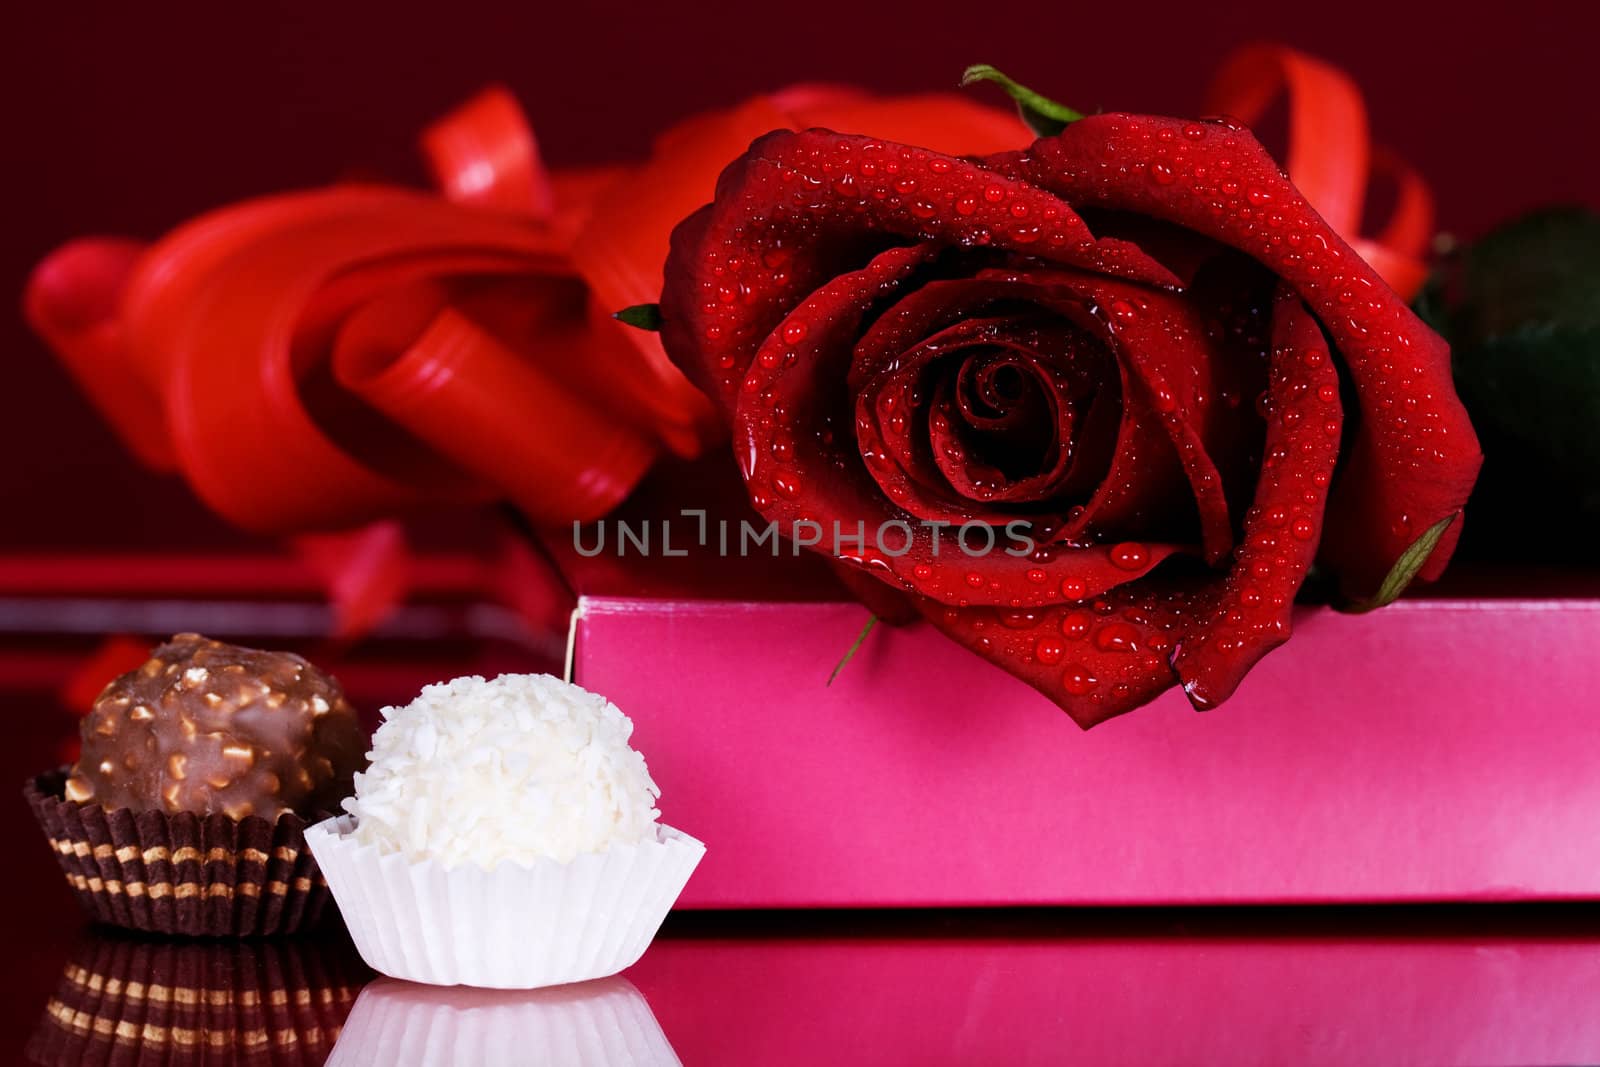 Roses and Sweets by Irina1977